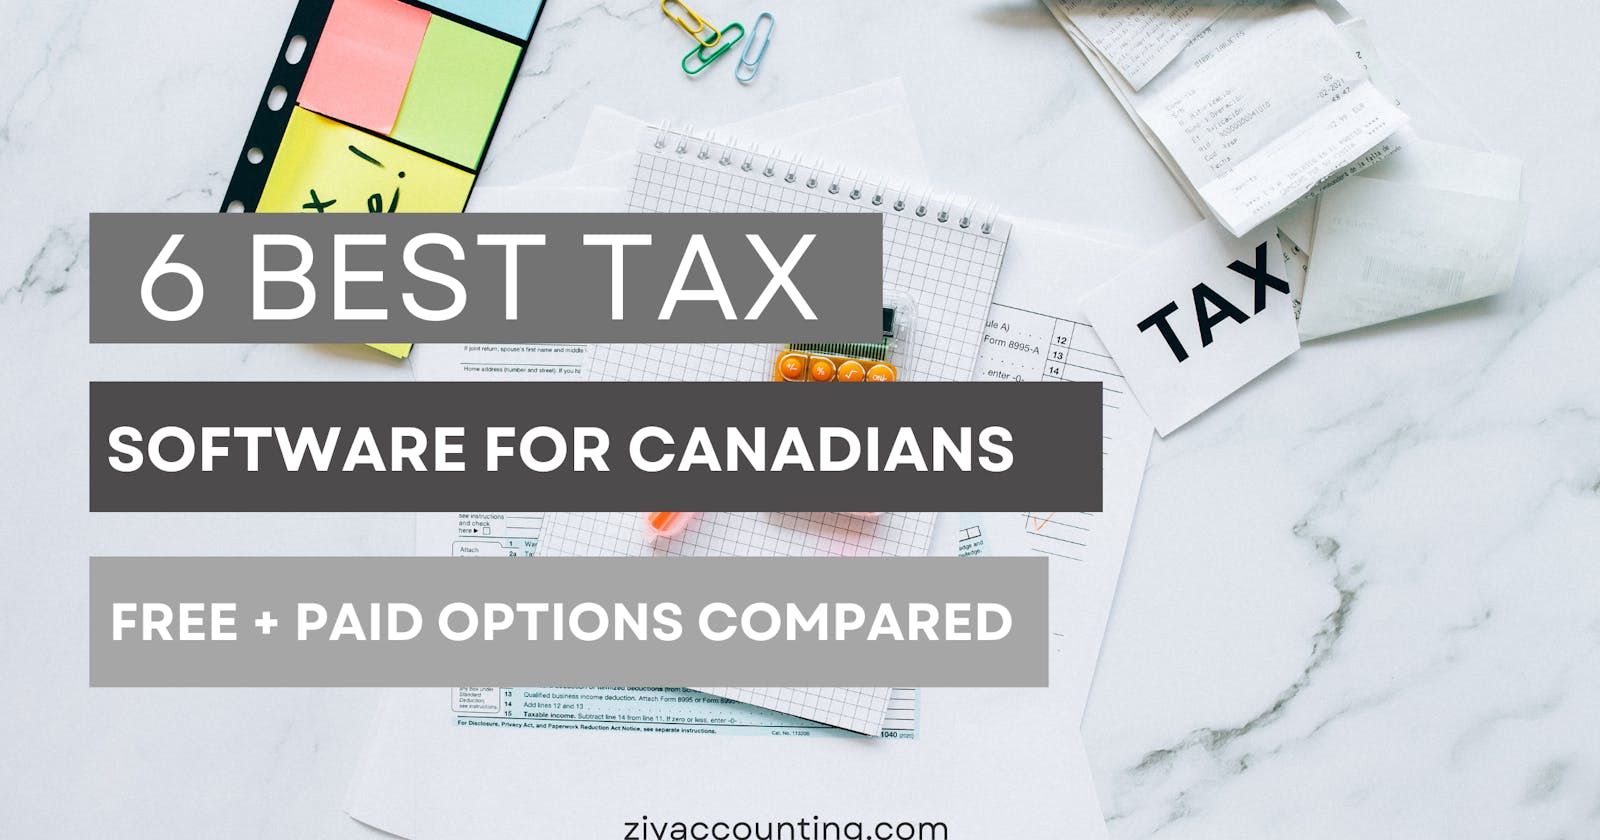 6 Best Tax Software for Canadians (Free + Paid Options Compared)